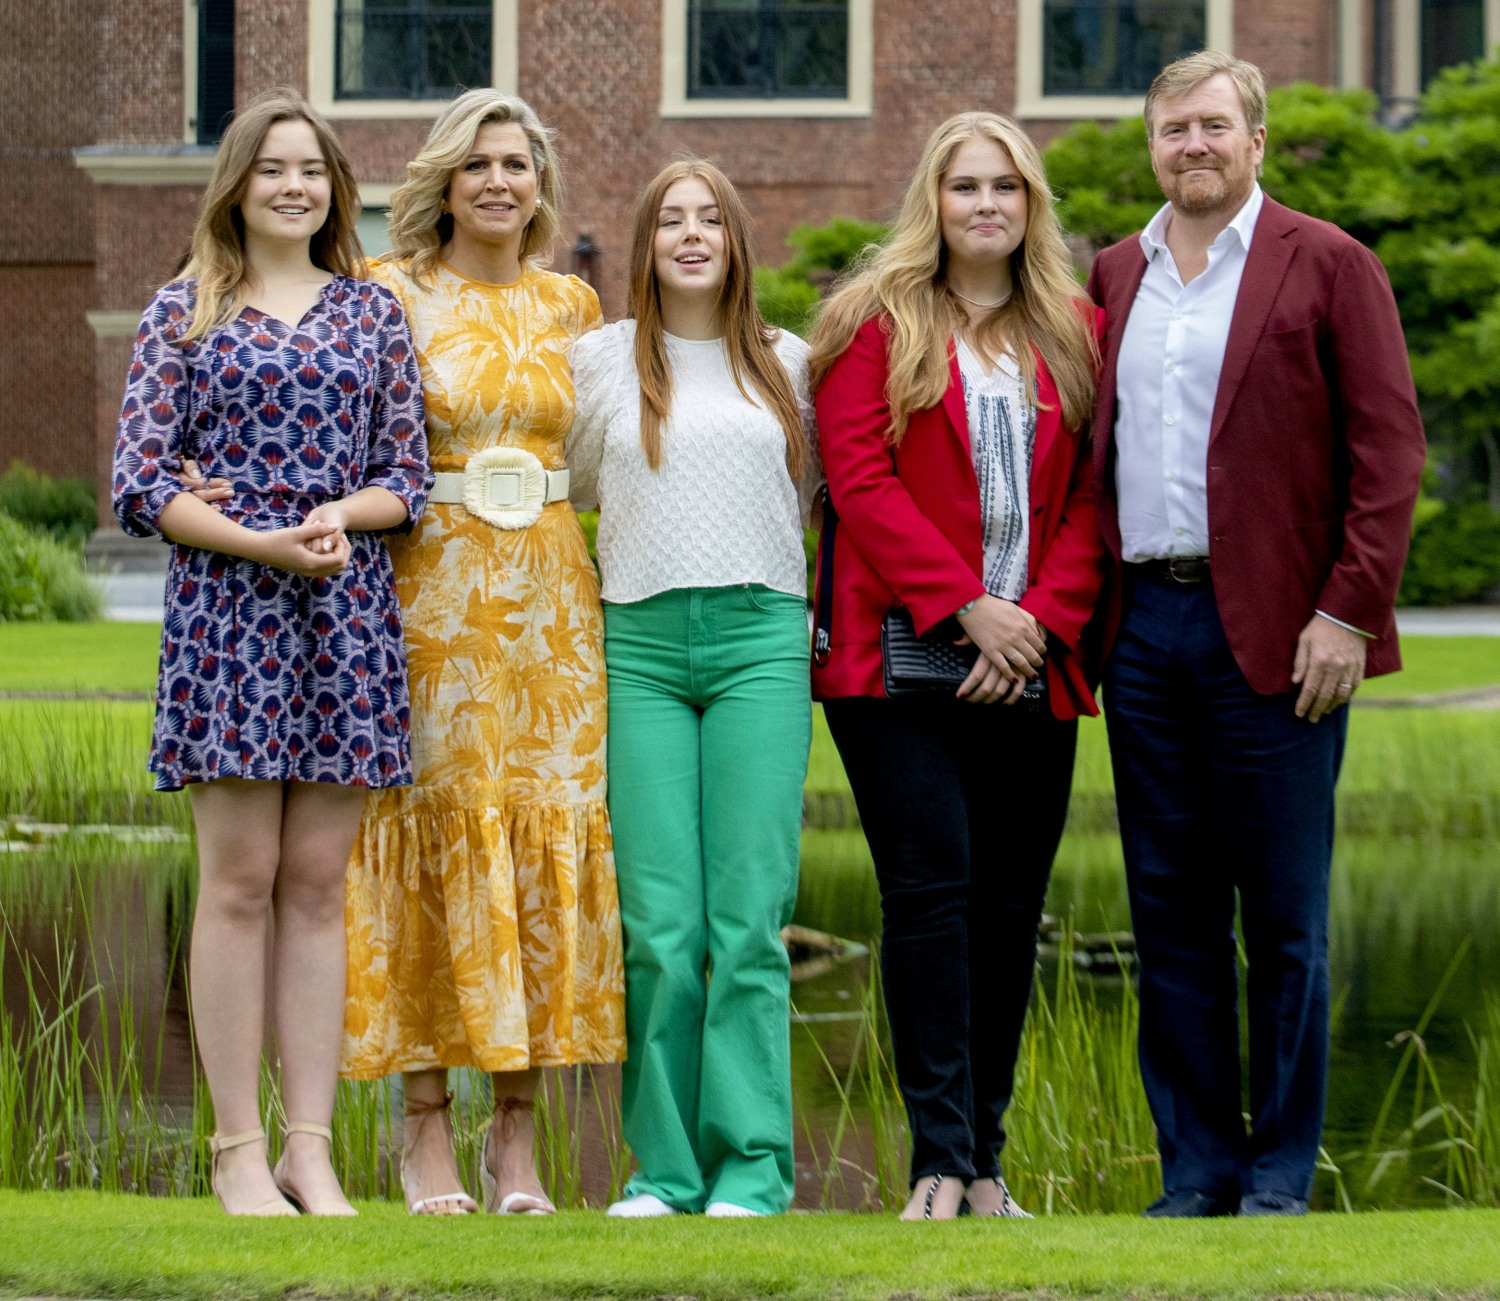 Photo session Dutch Royal Family Photo: Albert Nieboer / Netherlands OUT / Point de Vue OUT